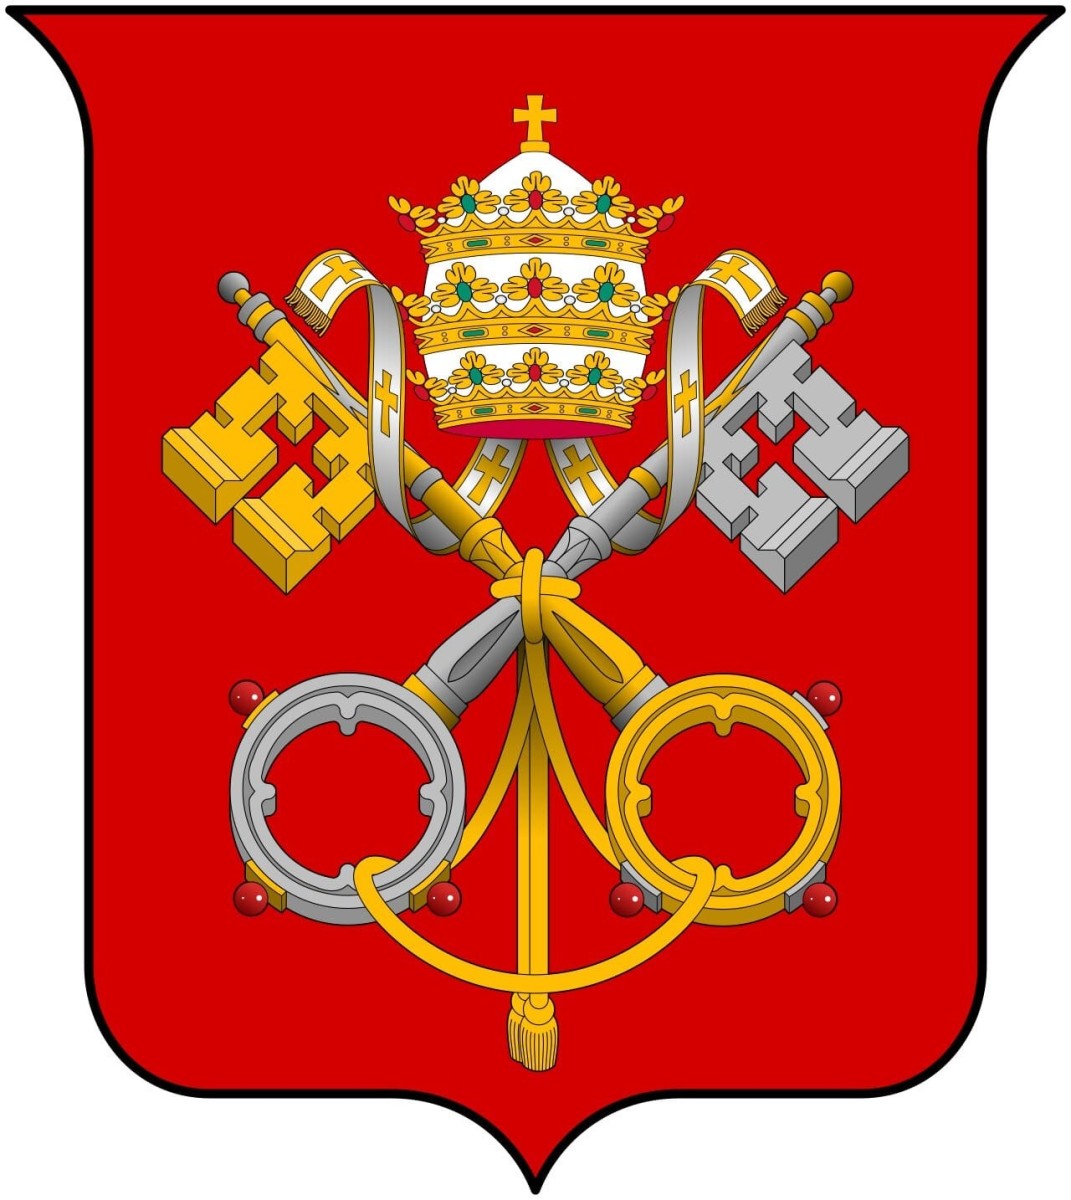 Coat of Arms of the Congregatio Pro Doctrina Fidei. This is an important symbol in the Catholic liturgy.